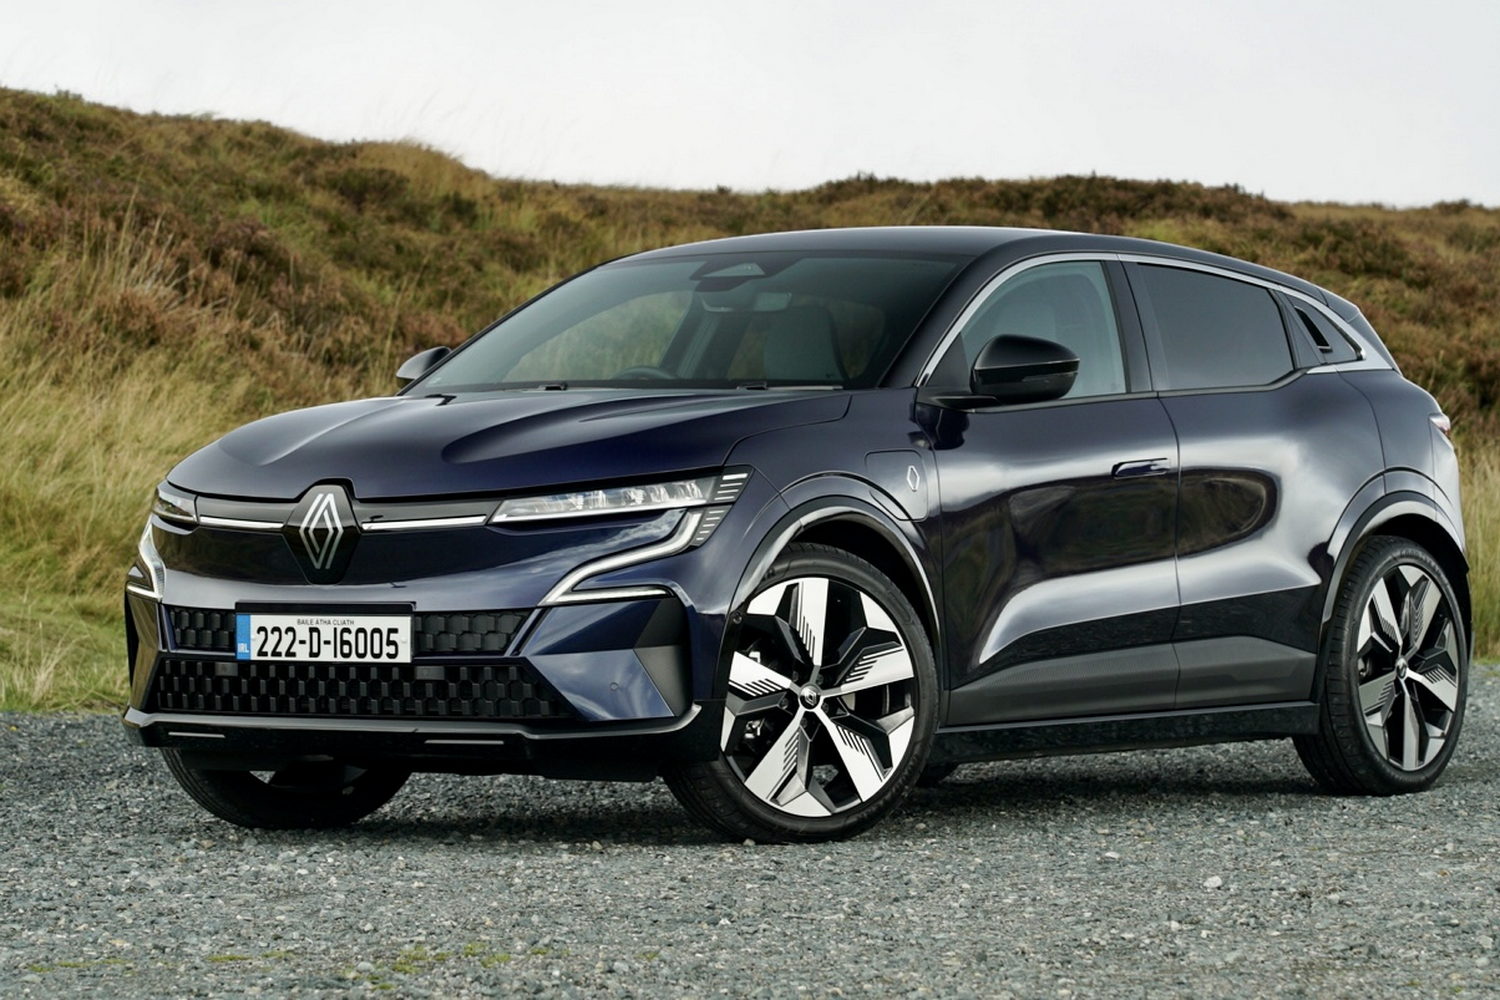 Car News | Electric Megane costs €37,495 in Ireland | CompleteCar.ie